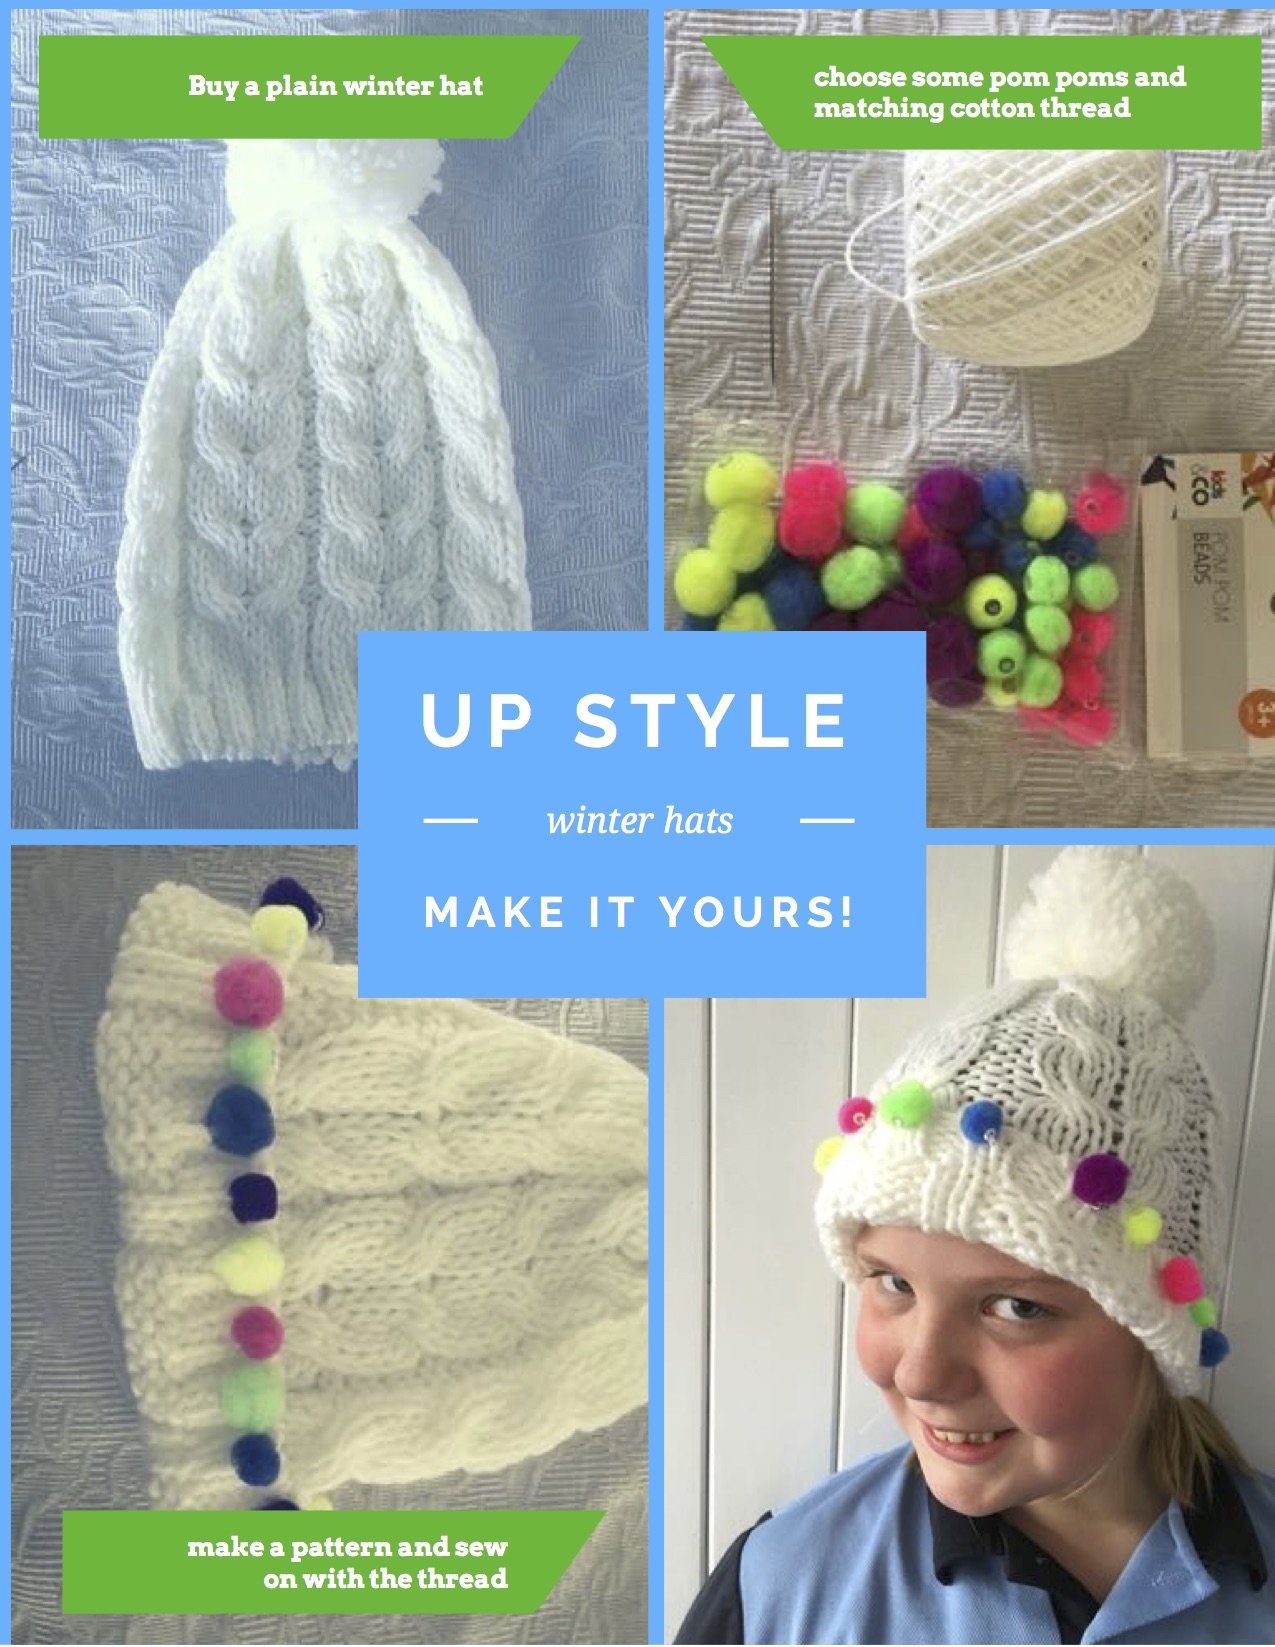 UP style hat